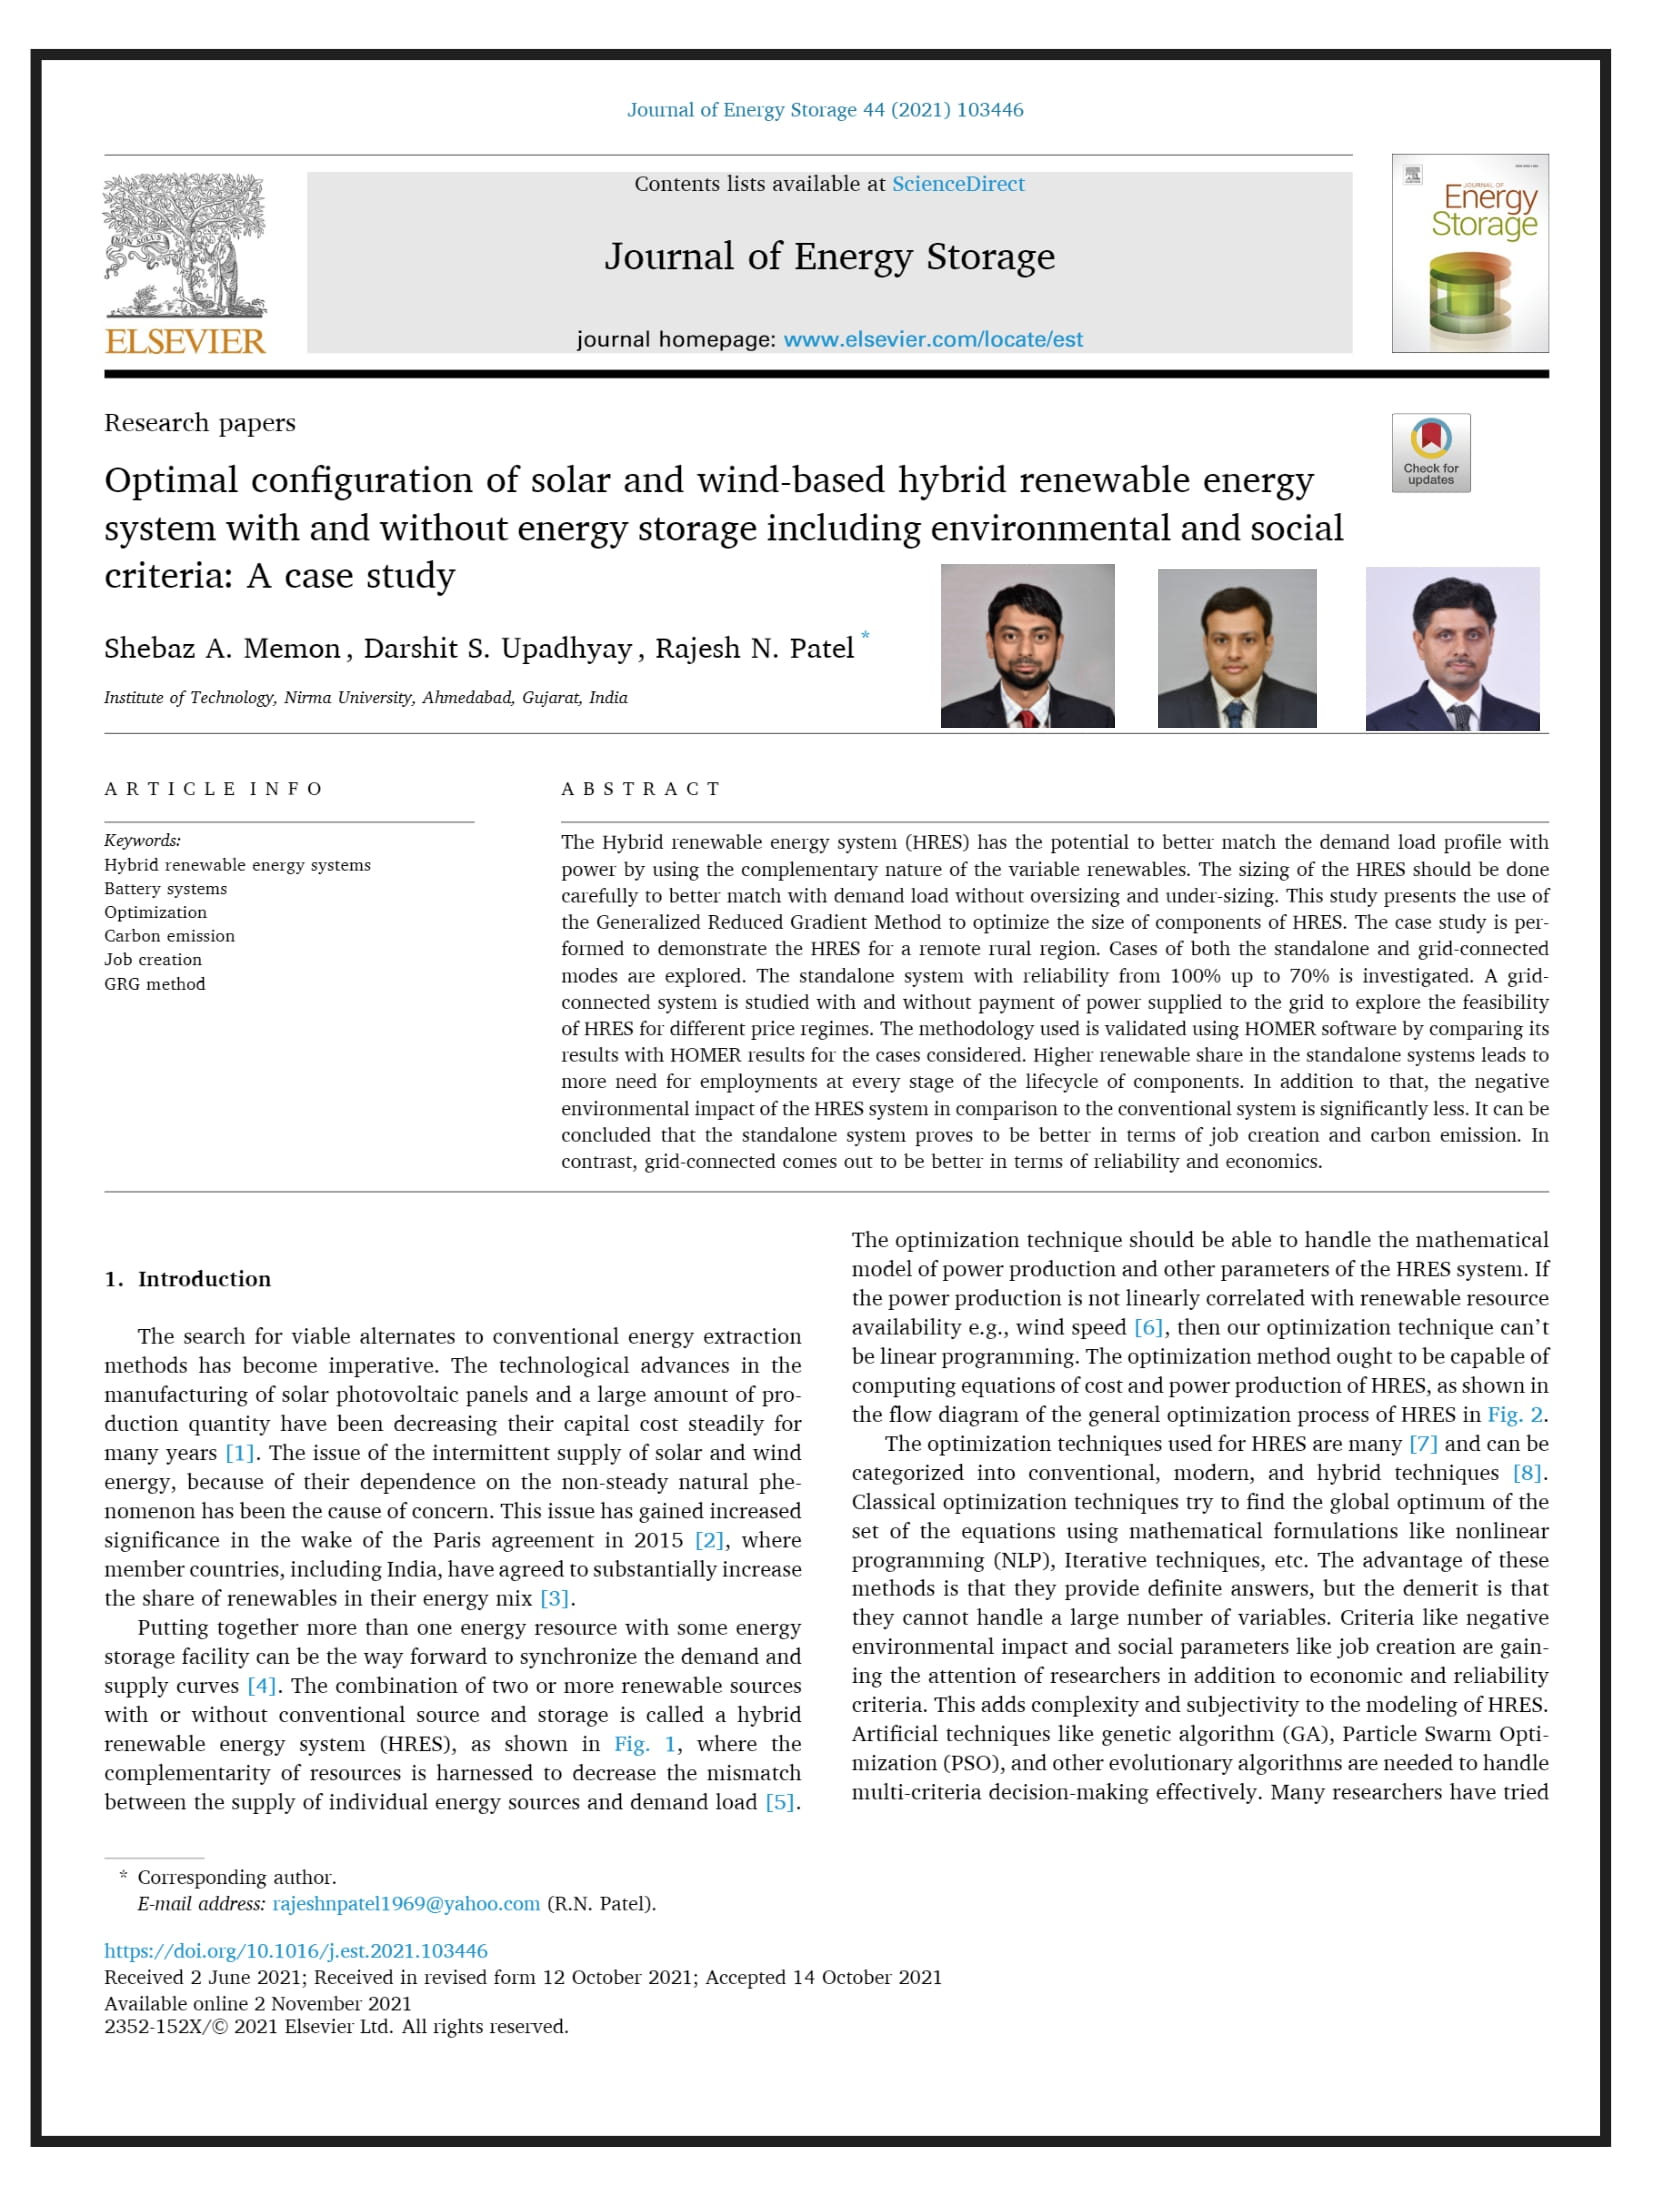 Optimal configuration of solar and wind-based hybrid renewable energy system with and without energy storage including environmental and social criteria: A case study